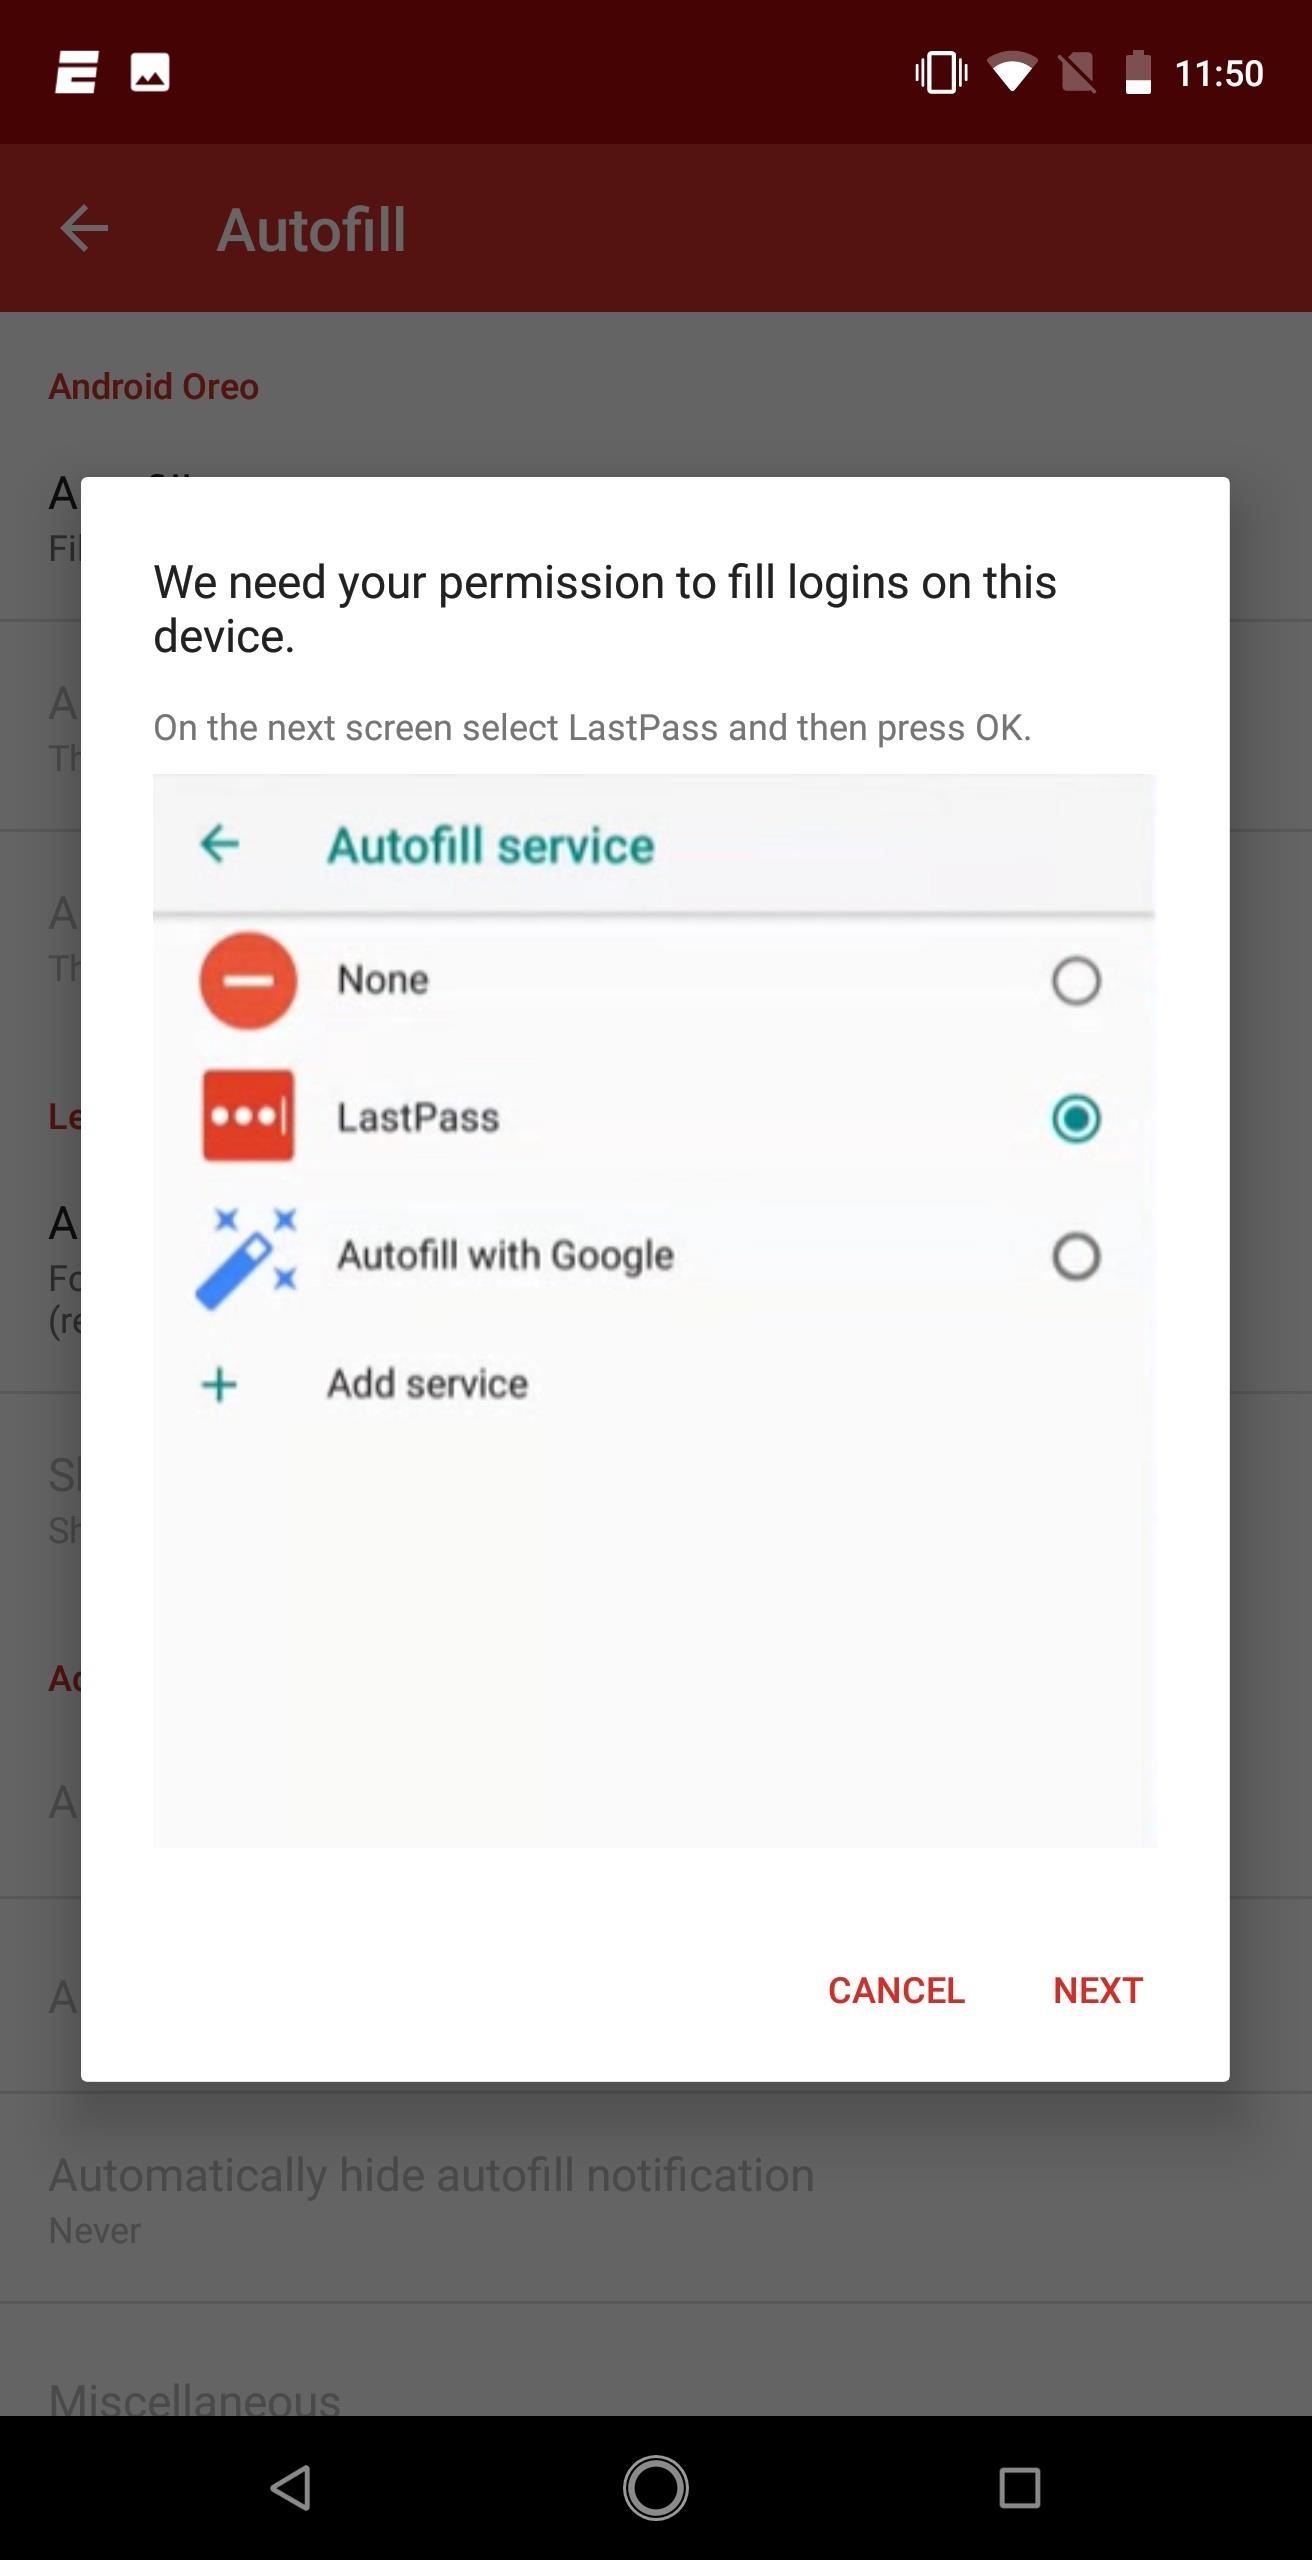 LastPass's AutoFill API Is Finally Out of Beta - Here's How Oreo Users Can Turn It On